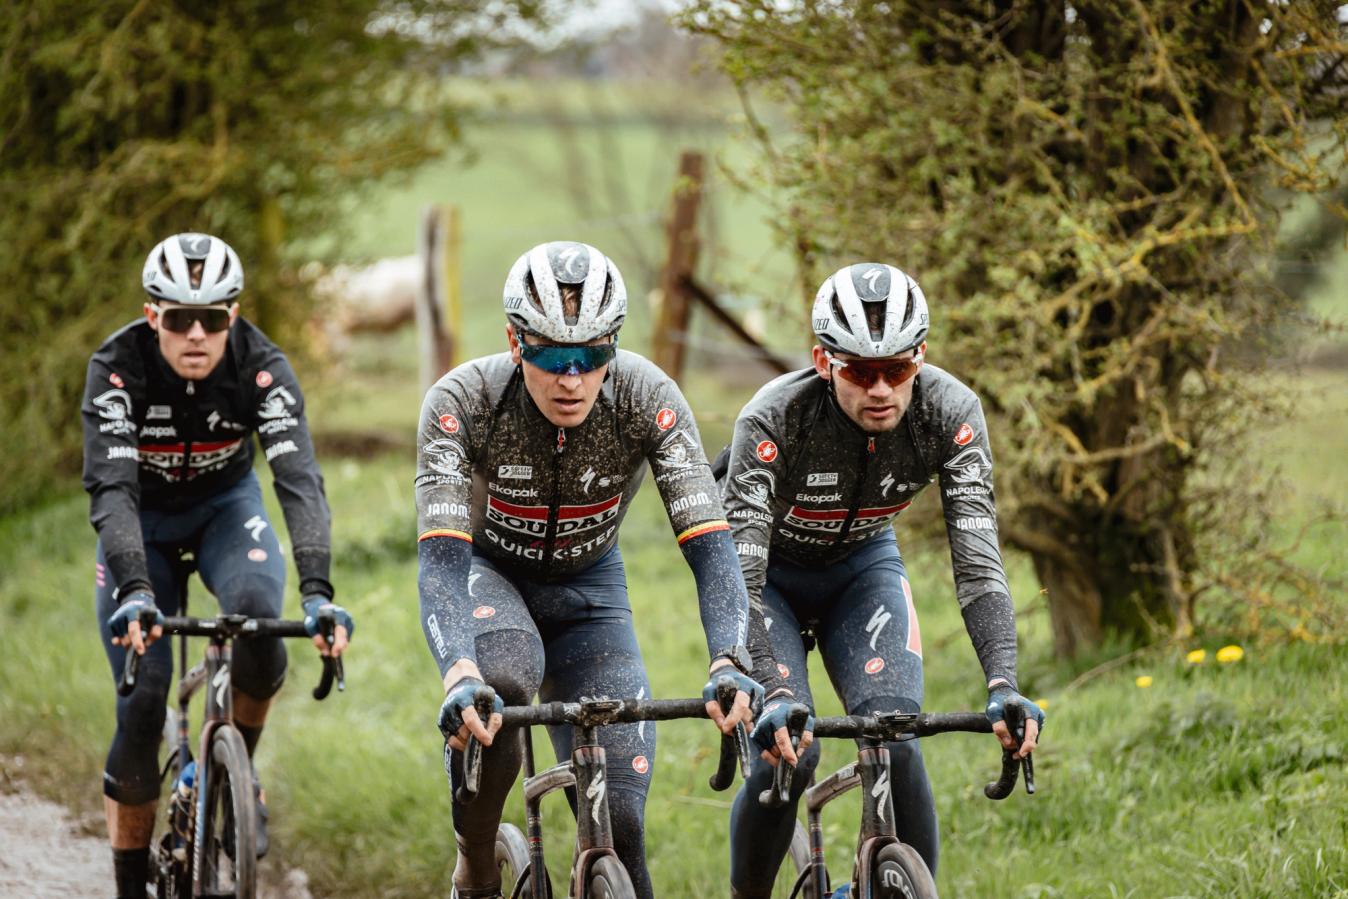 Soudal Quick-Step riders used the new Gabba R jackets during their Paris-Roubaix recon